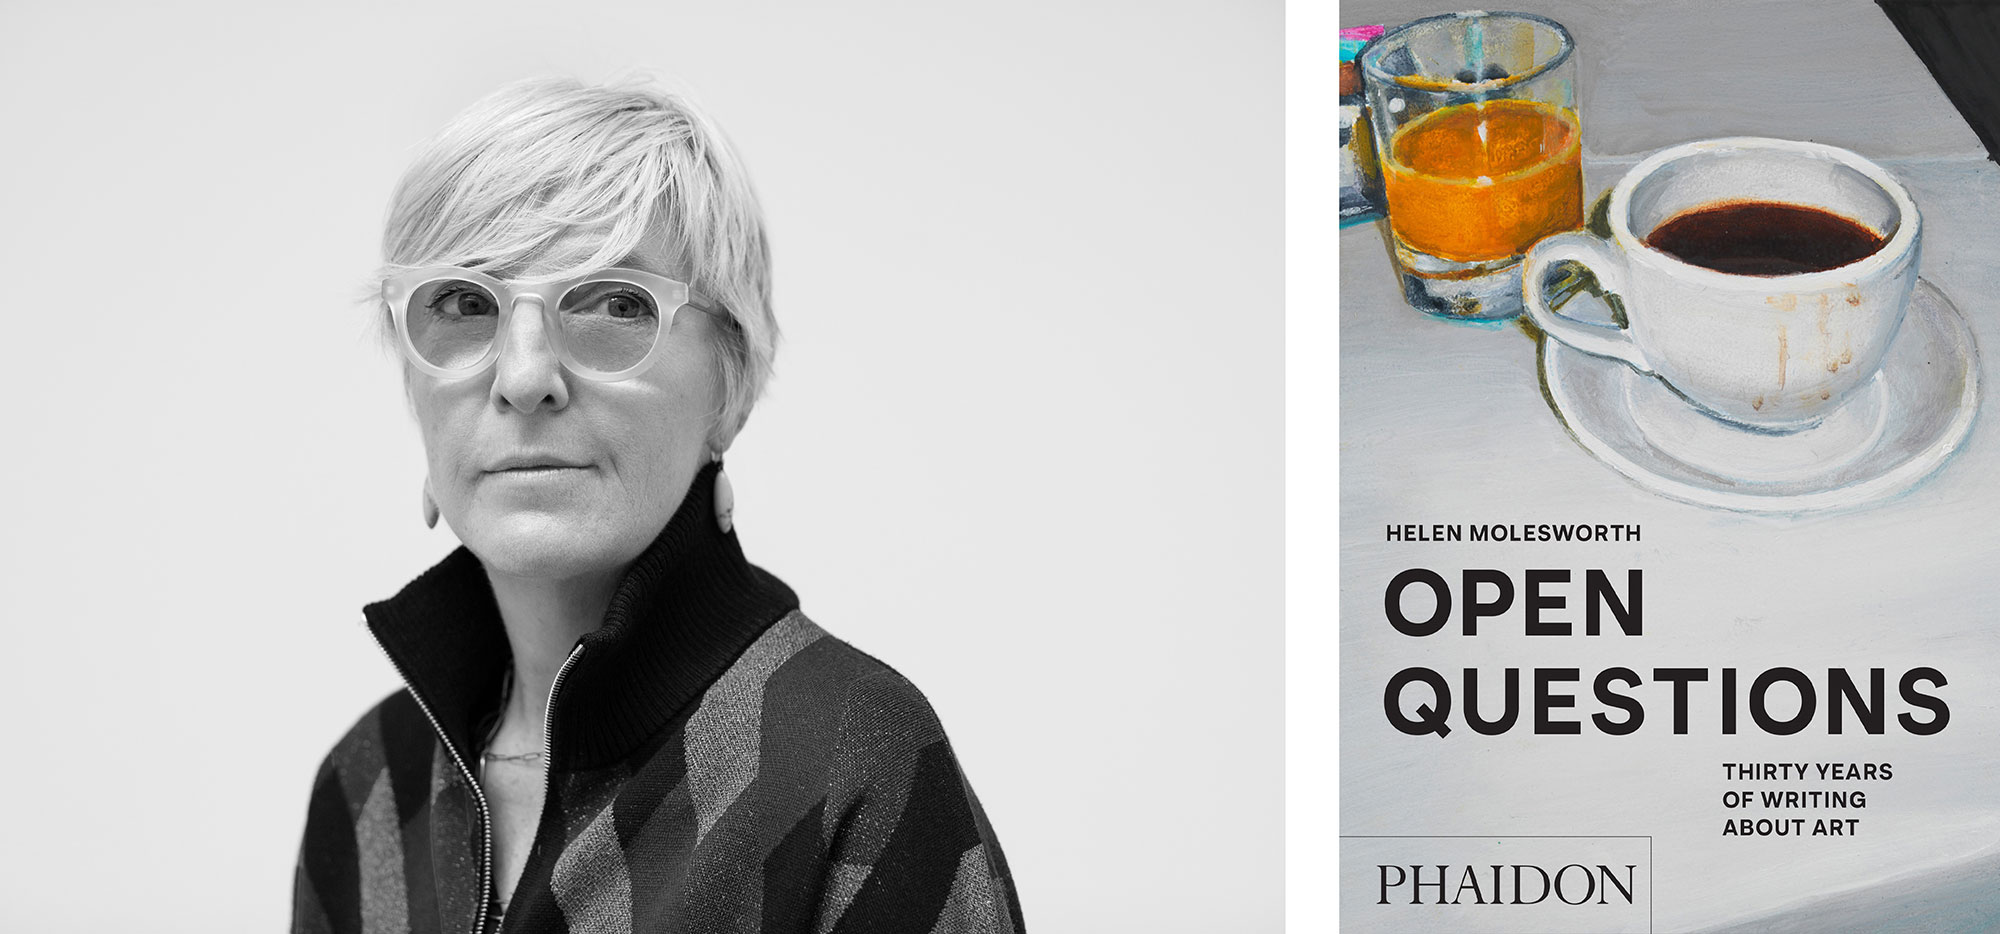 Helen Molesworth Open Questions: Thirty Years of Writing About Art